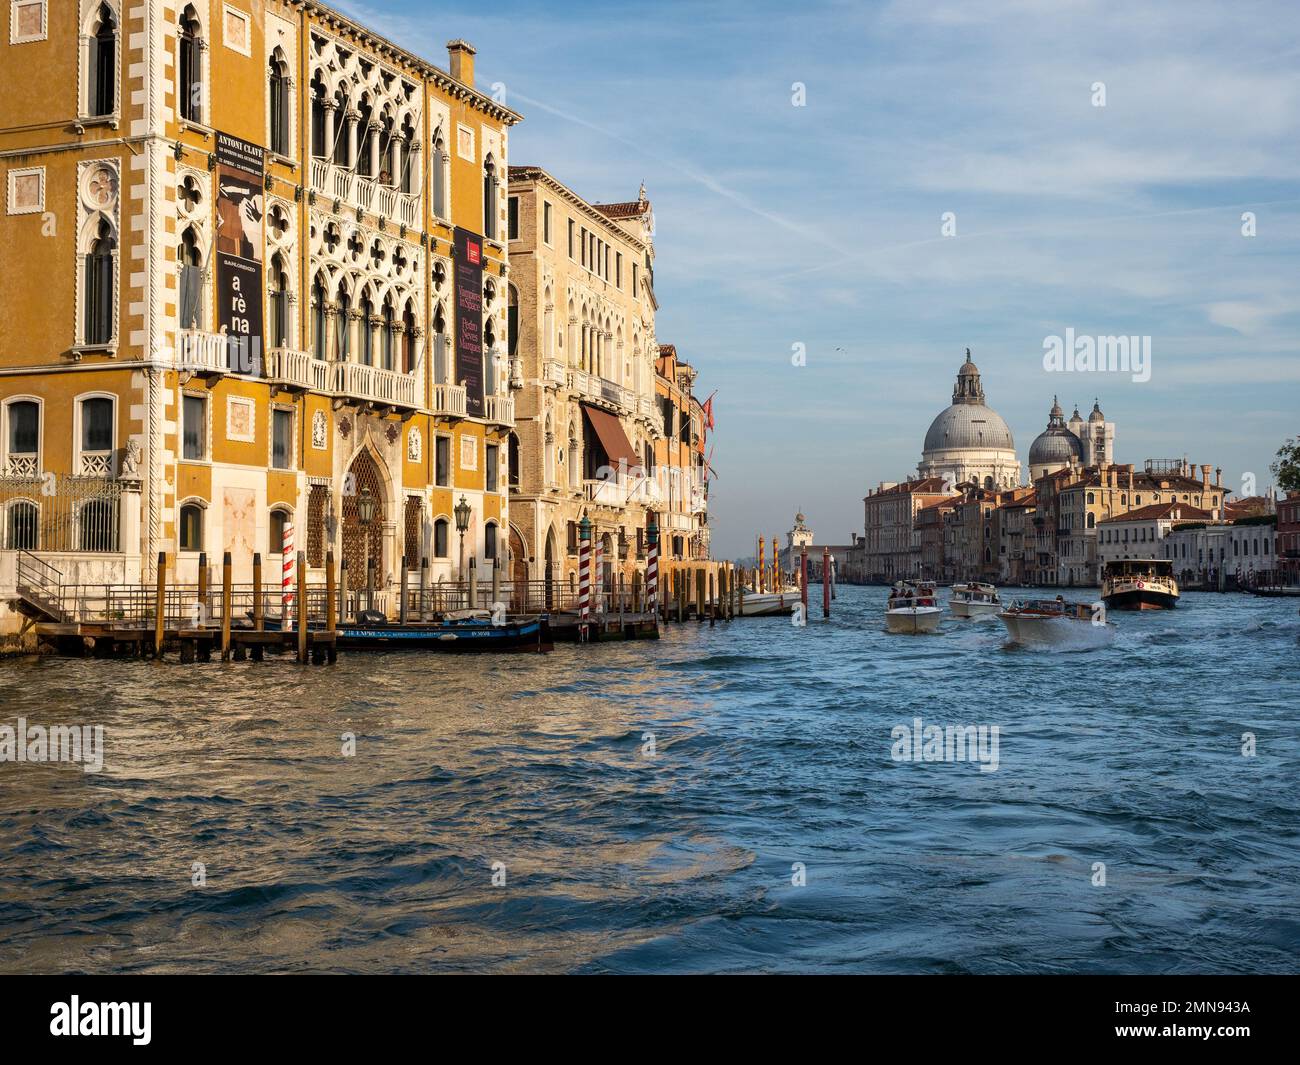 Grand canal in the city of Venice, Italy. Tourism concept. Stock Photo